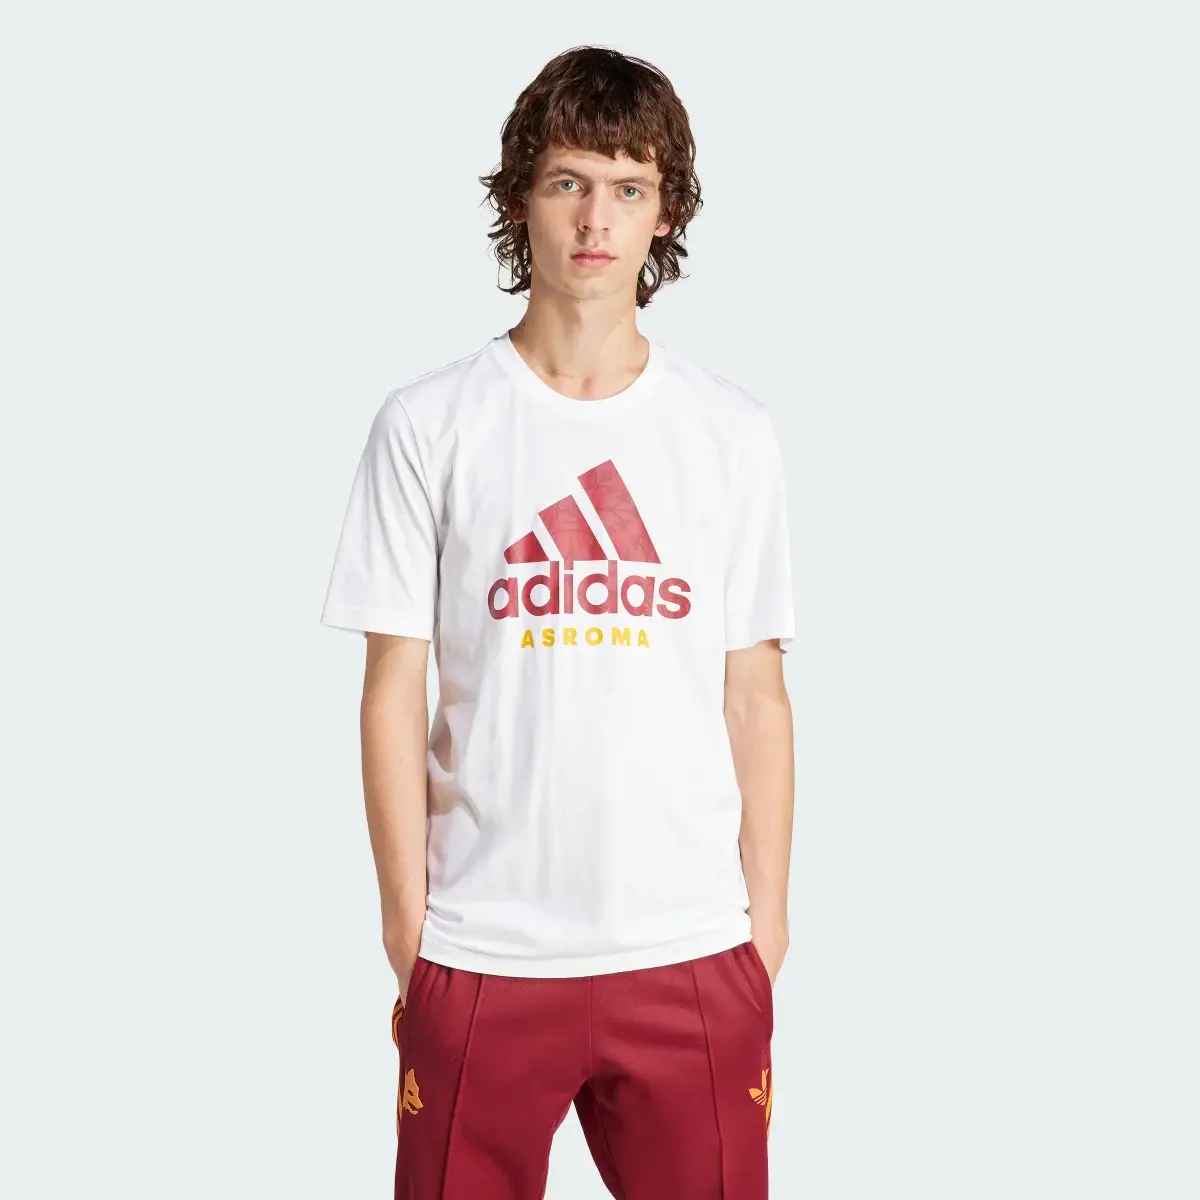 Adidas AS Roma DNA Graphic T-Shirt. 2